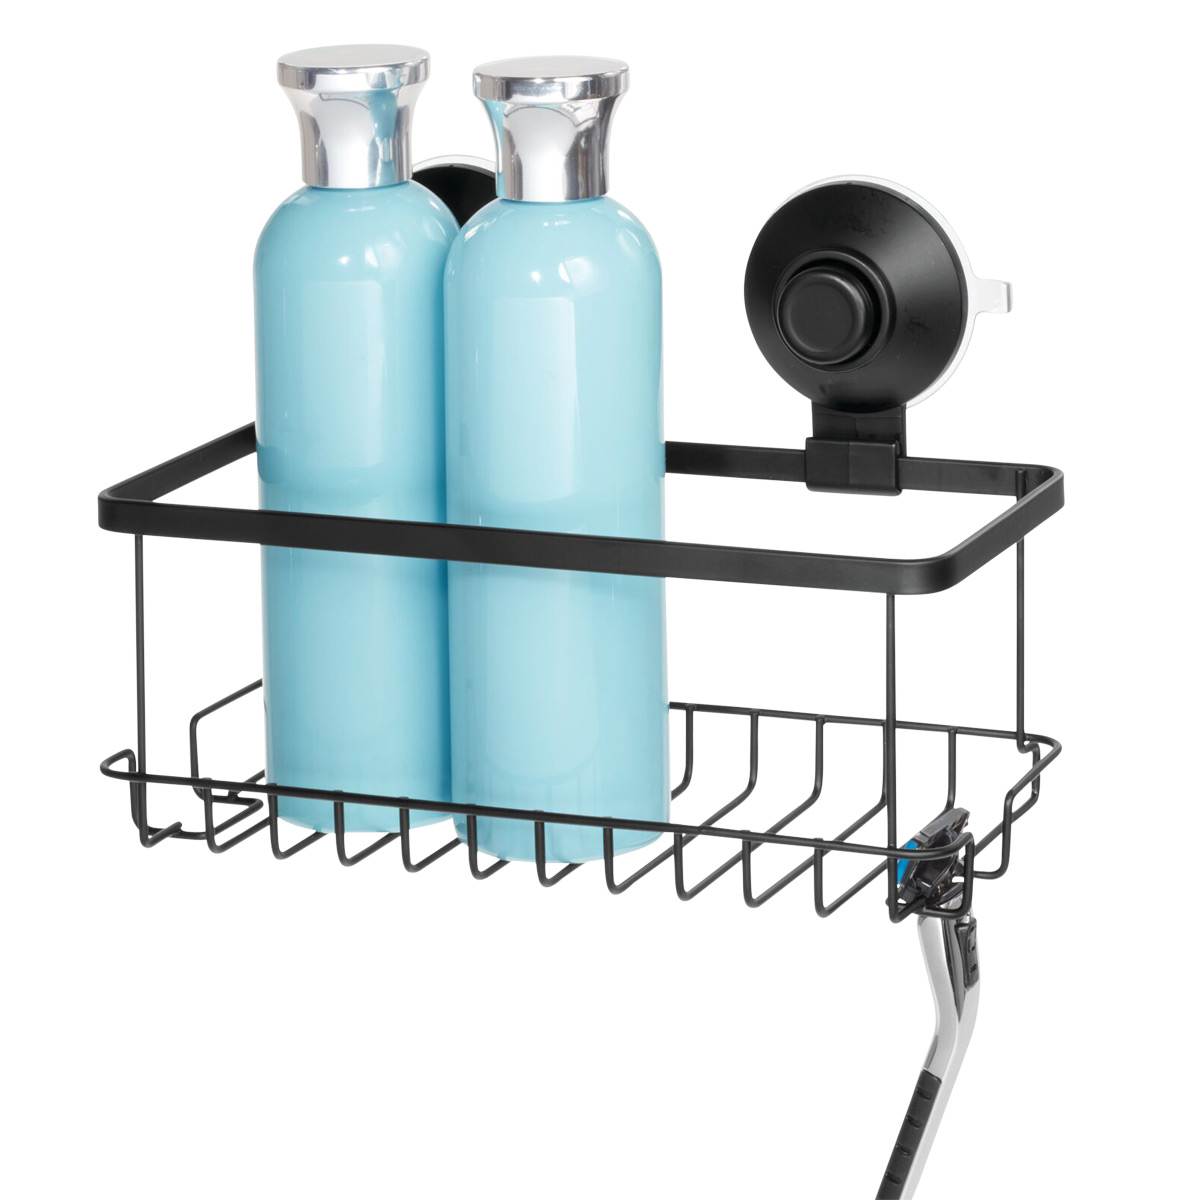 IDESIGN Everett Push Lock Suction Shower Caddy in Satin 23592CX - The Home  Depot